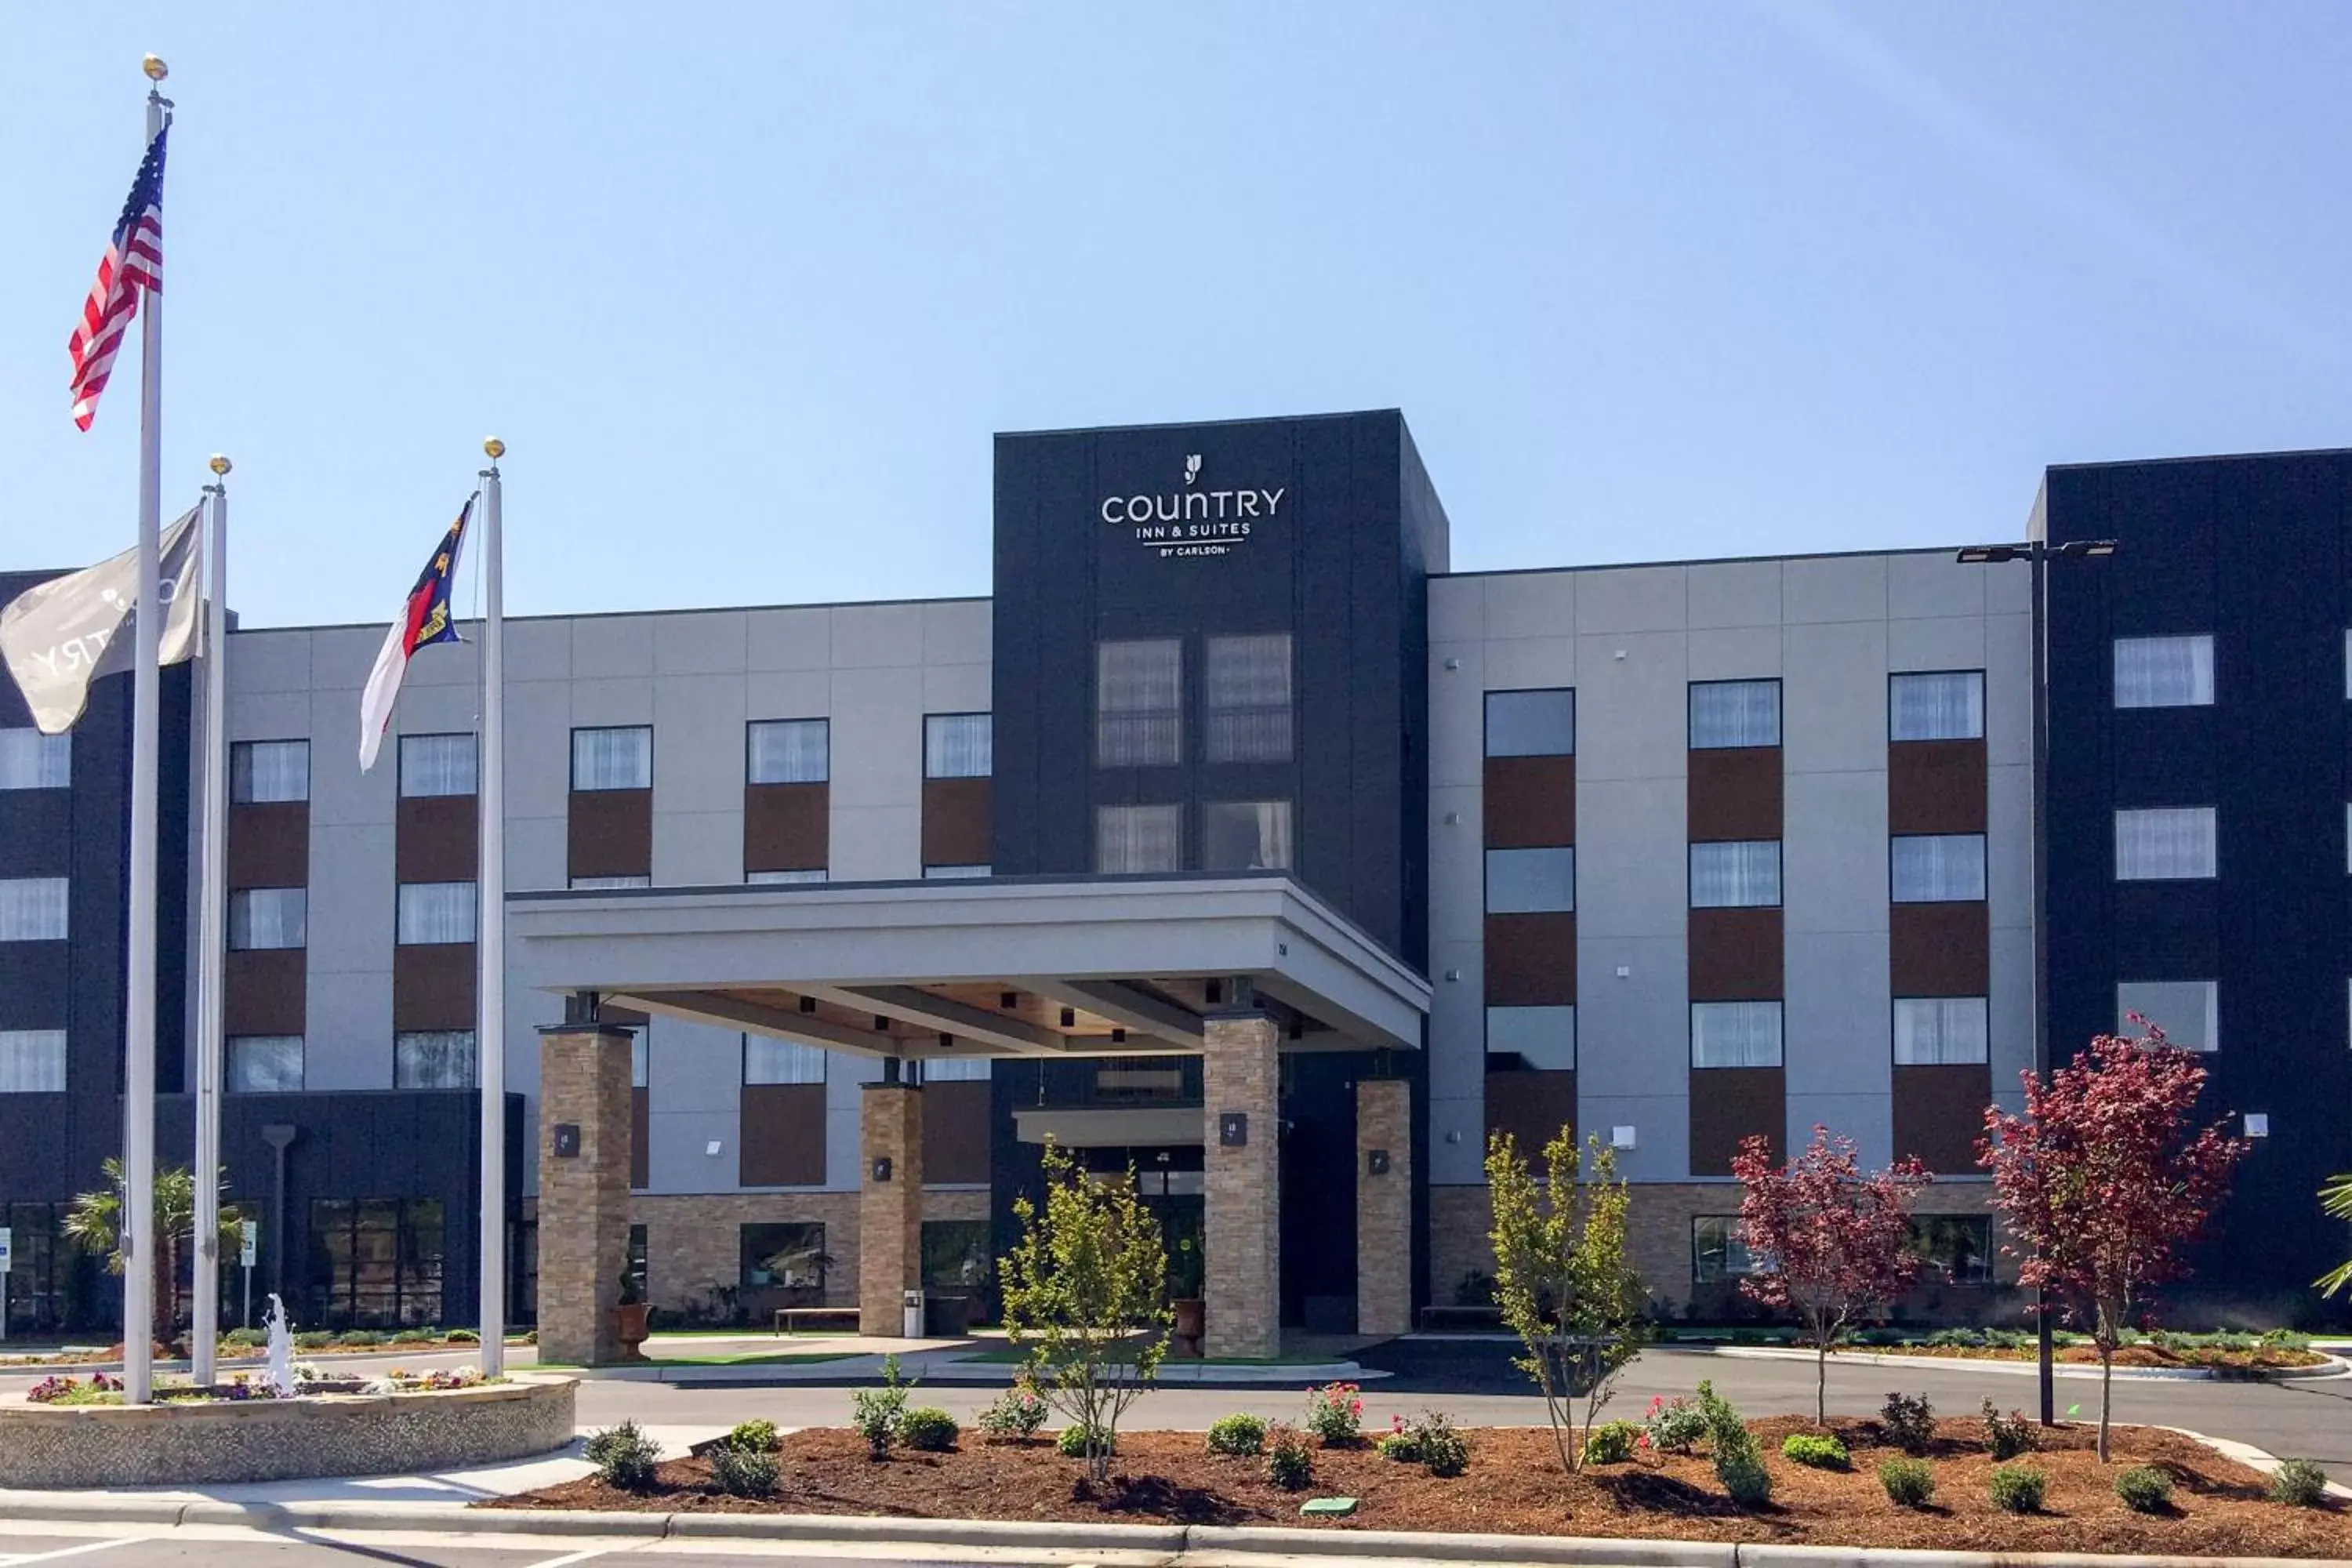 Facade/entrance, Property Building in Country Inn & Suites by Radisson, Smithfield-Selma, NC